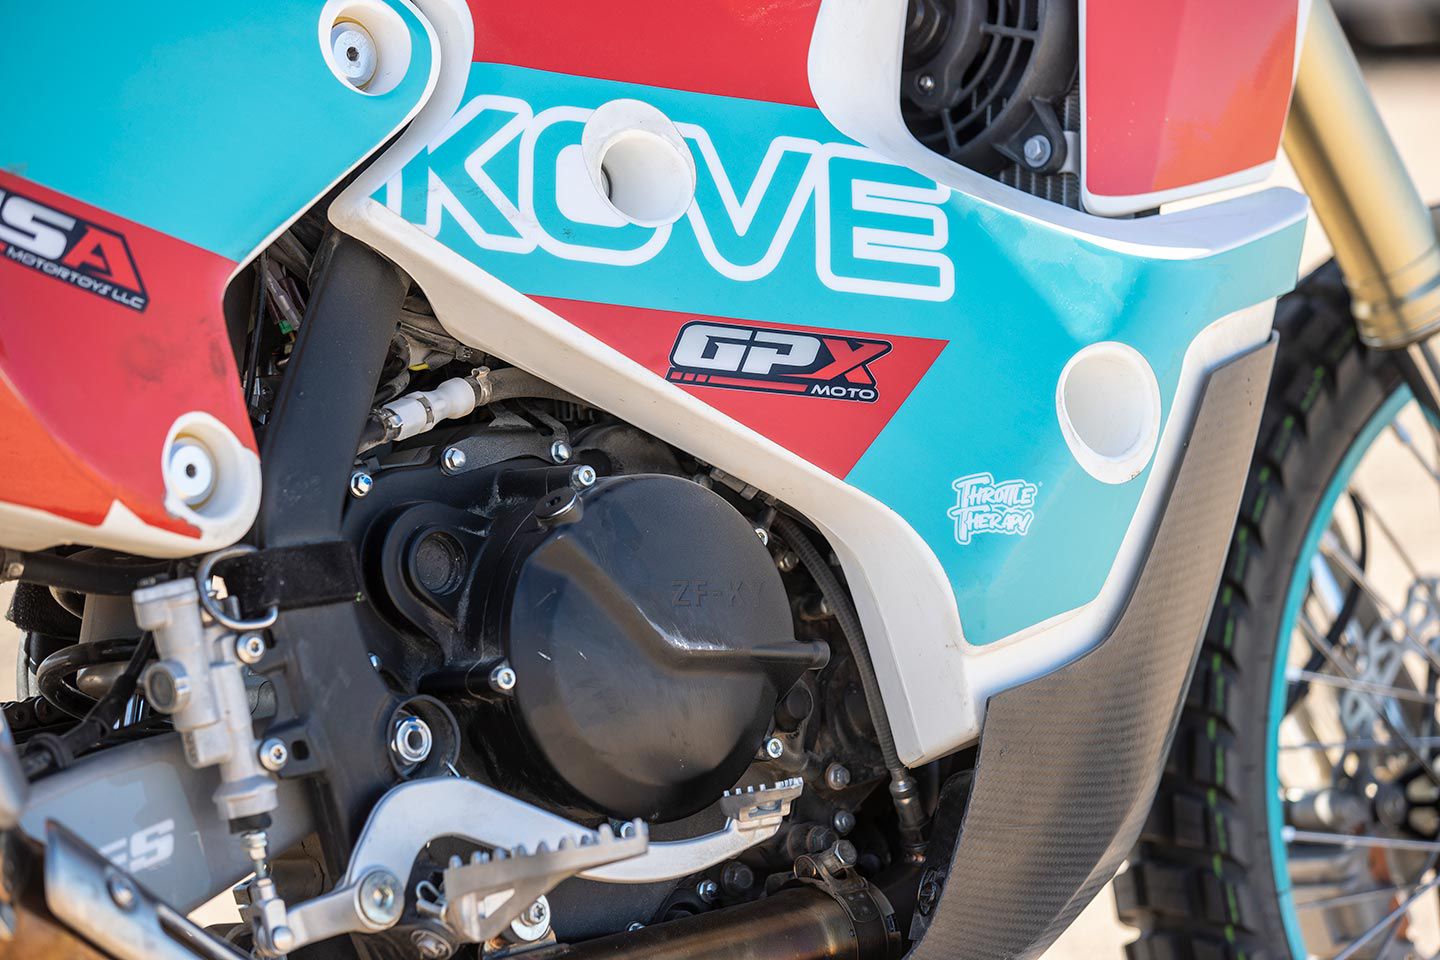 The 2023 Kove Moto FSE 450R Rally is powered by a liquid-cooled 449cc DOHC fuel-injected single.